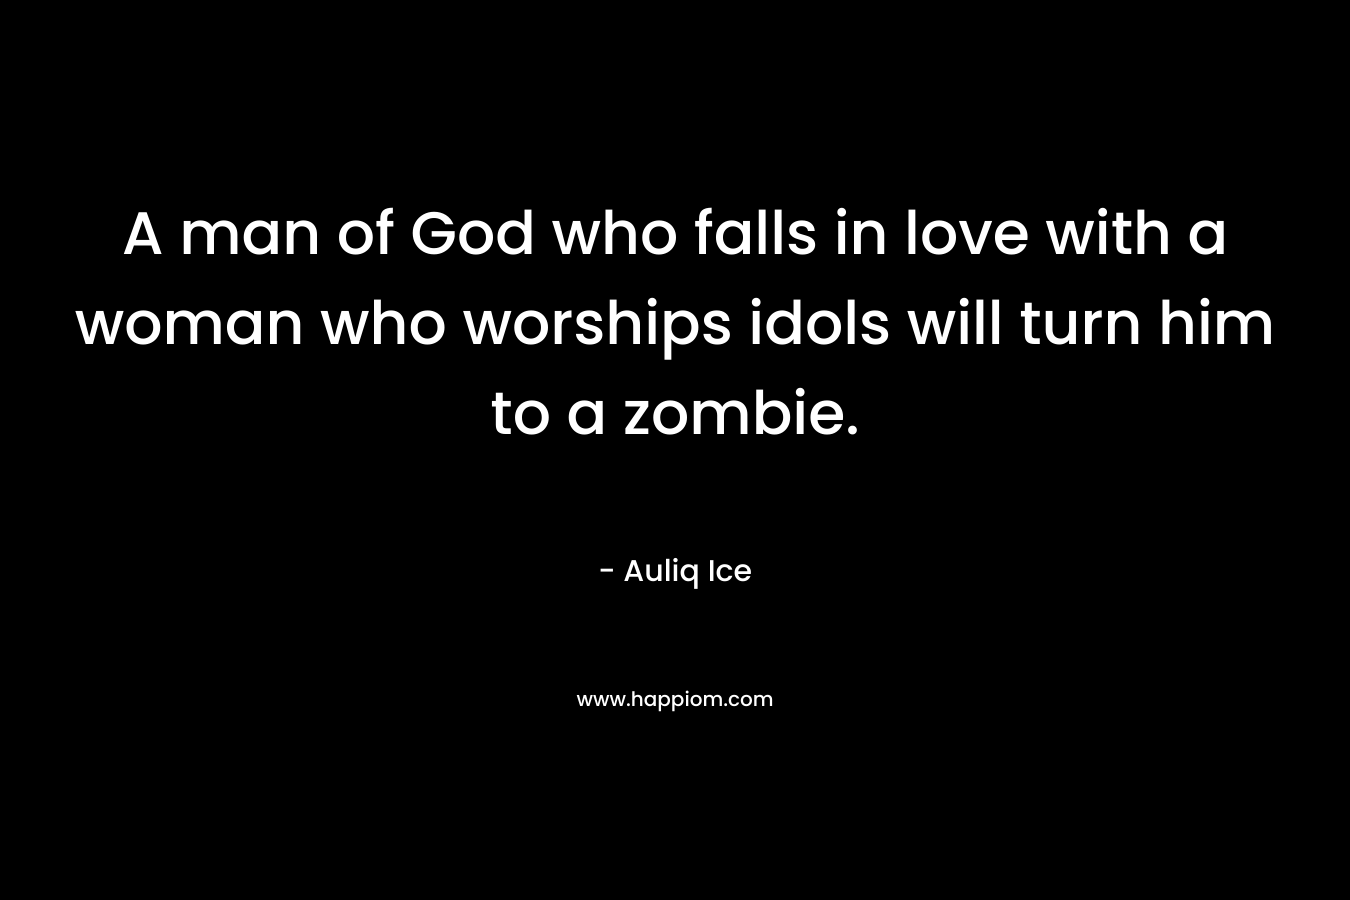 A man of God who falls in love with a woman who worships idols will turn him to a zombie. – Auliq Ice